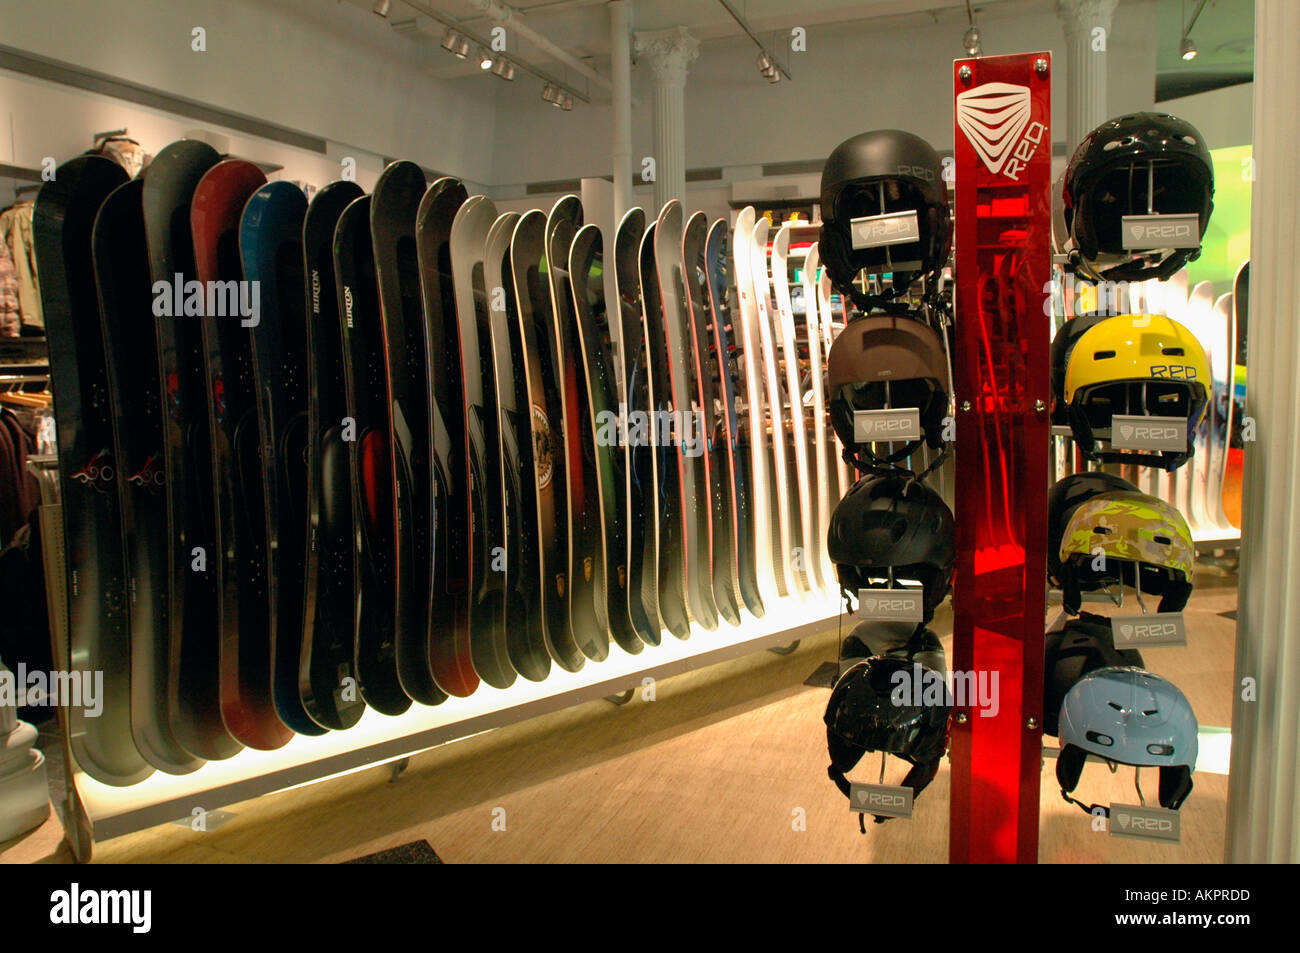 The Burton store in Soho in New York City selling snowboards and snowboard related recreational merchandise  Stock Photo